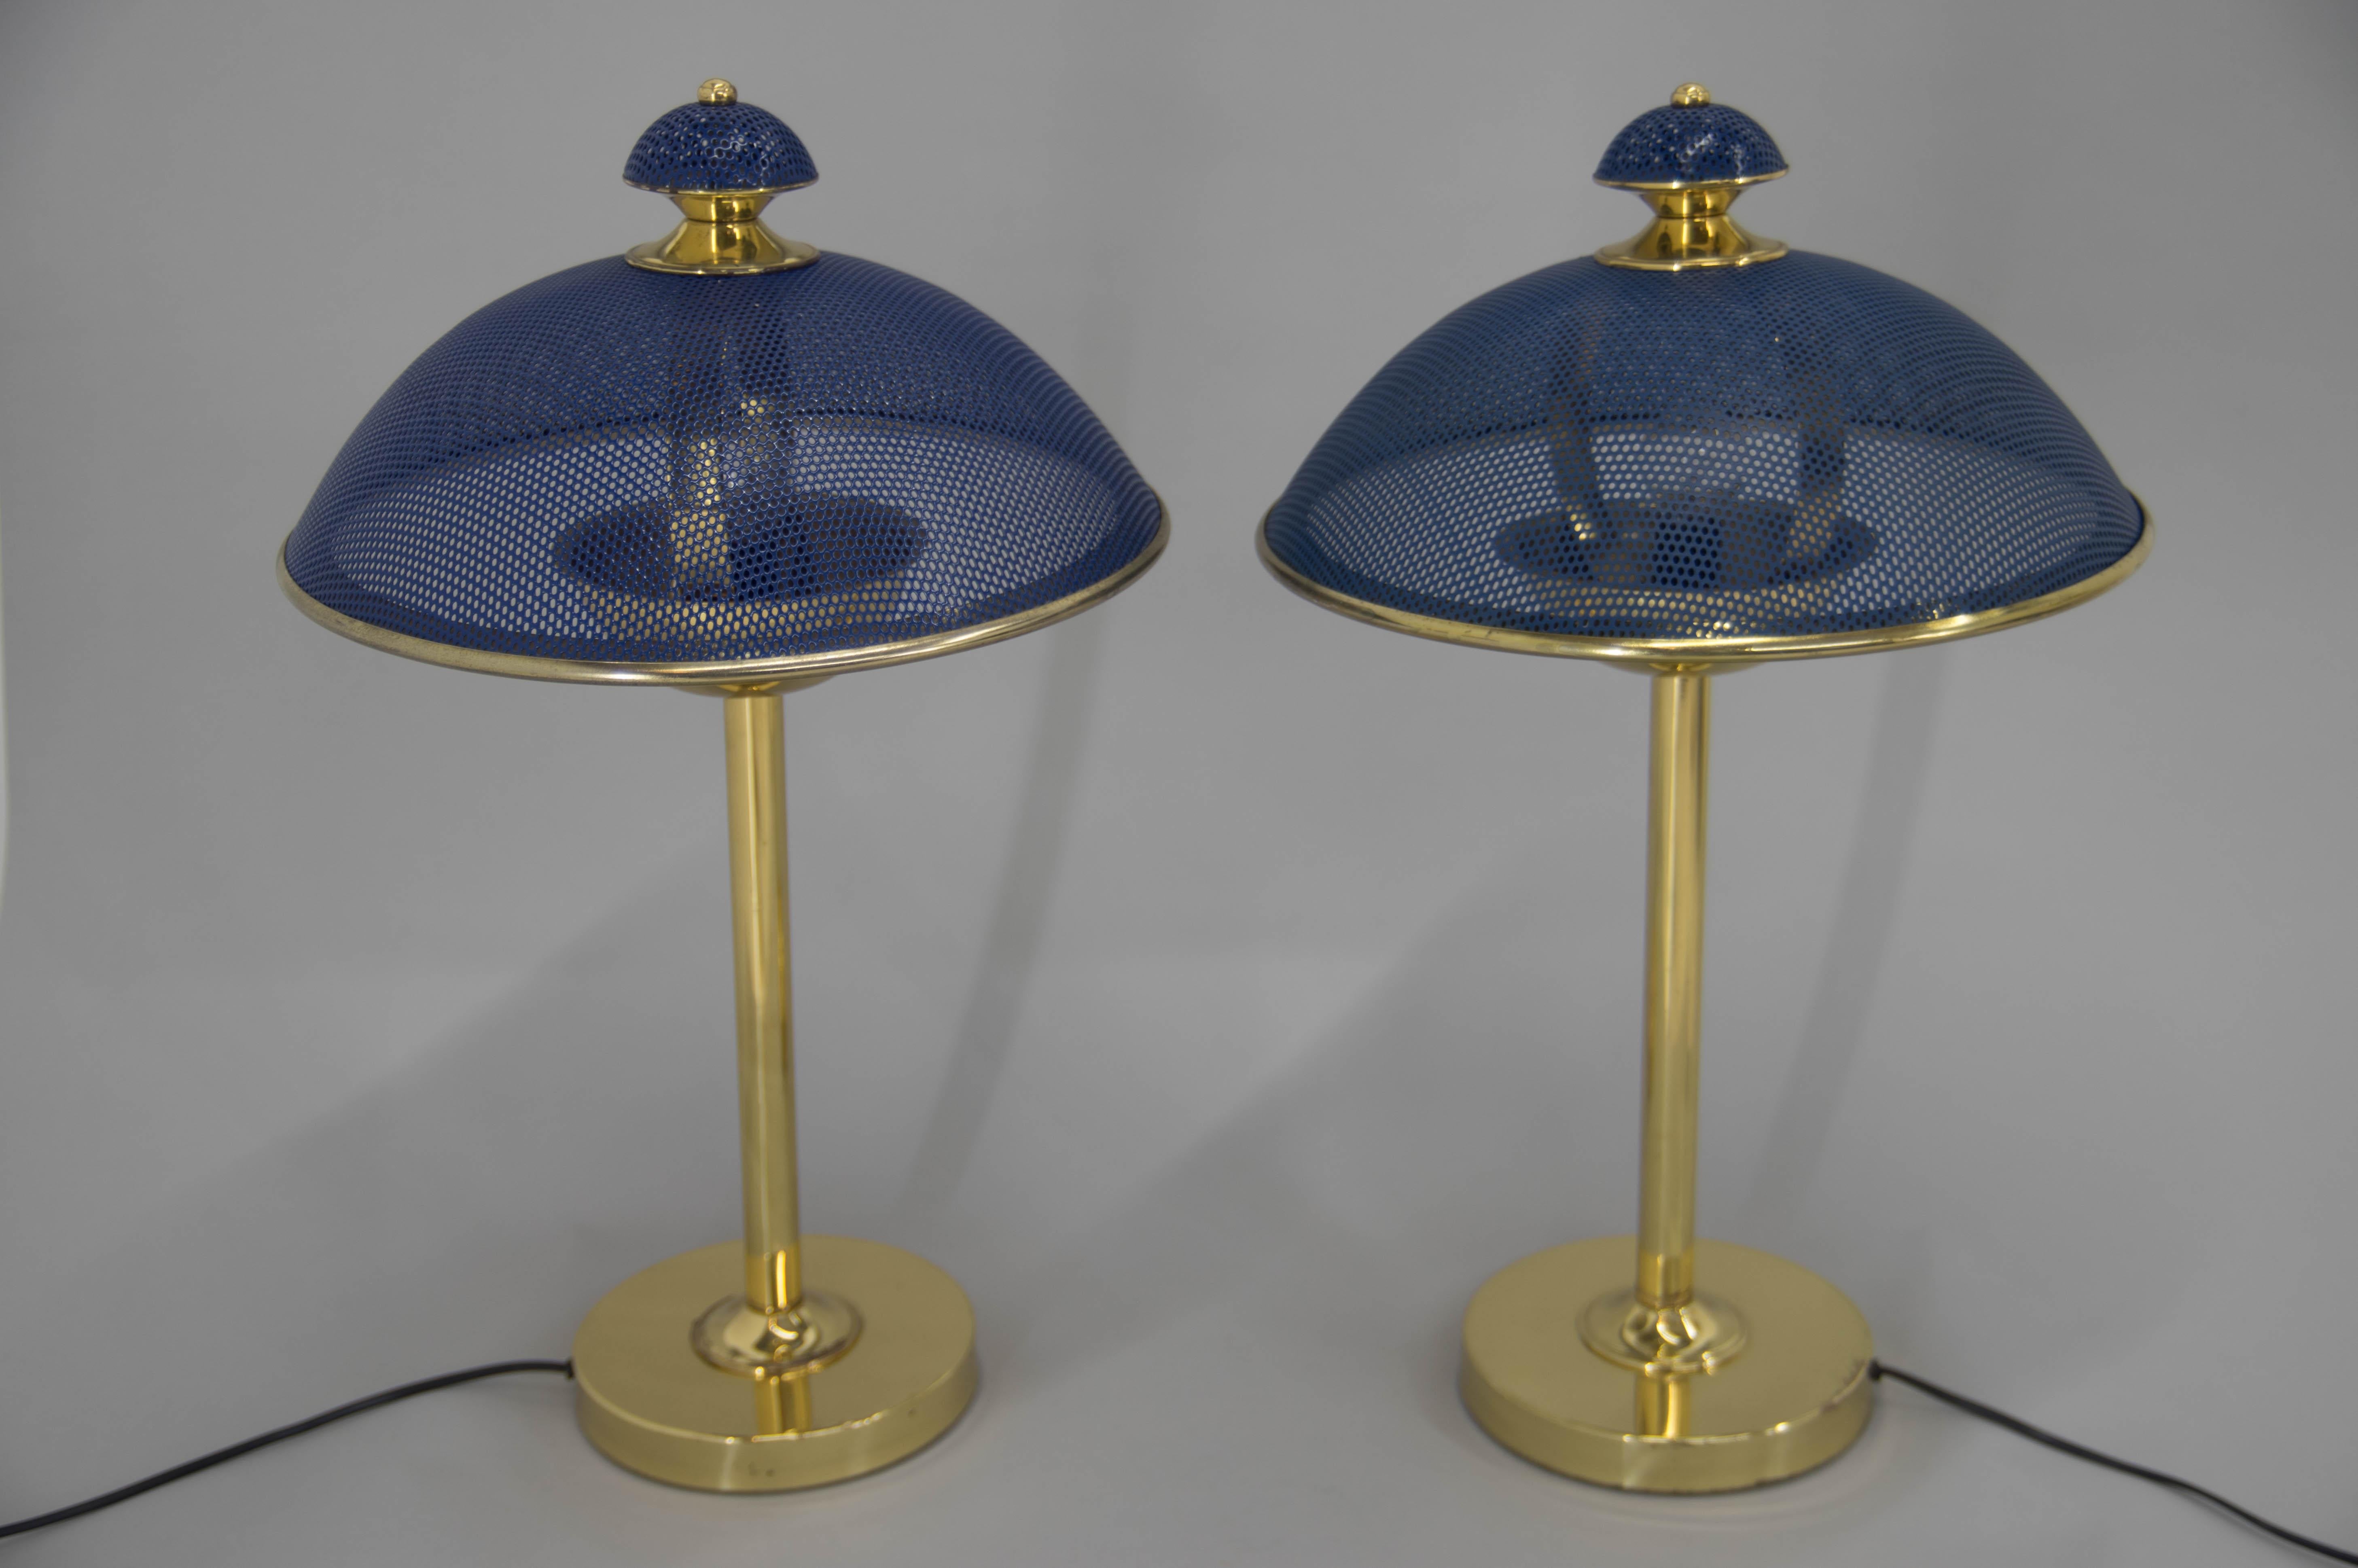 Two table lamps made of brass and blue lacquered metal.
Very good original condition.
Rewired: 1x40W, E12-E14 bulb
US plug adapter included.
 